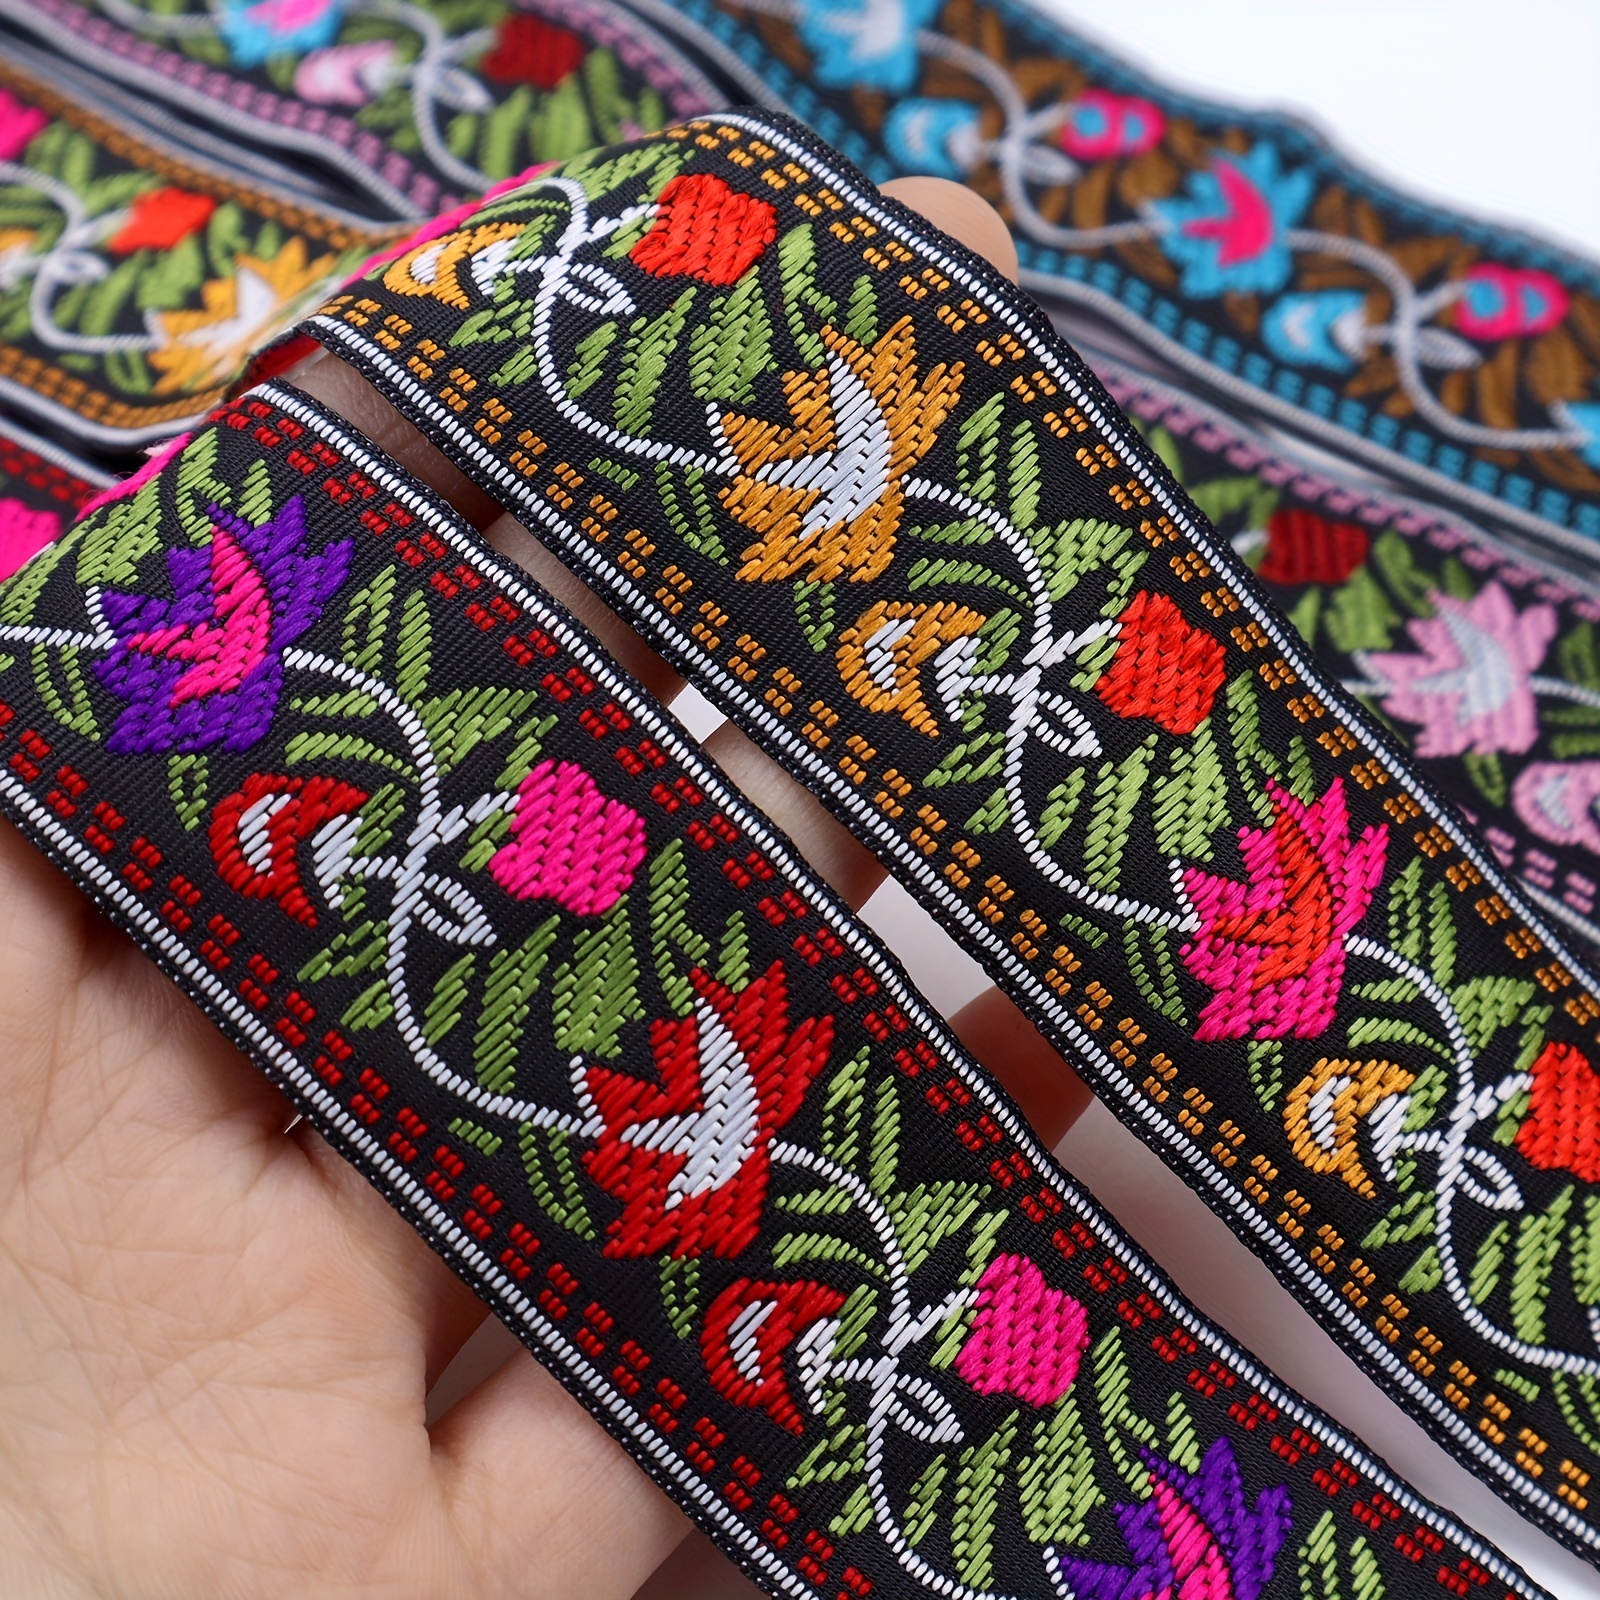 5 Yards Vintage Jacquard Ribbon Ethnic Embroidered Ribbon 1.9 inch Wide  Boho Lace Trim for DIY Sewing Clothing Accessories Handmade Bag  Embellishment